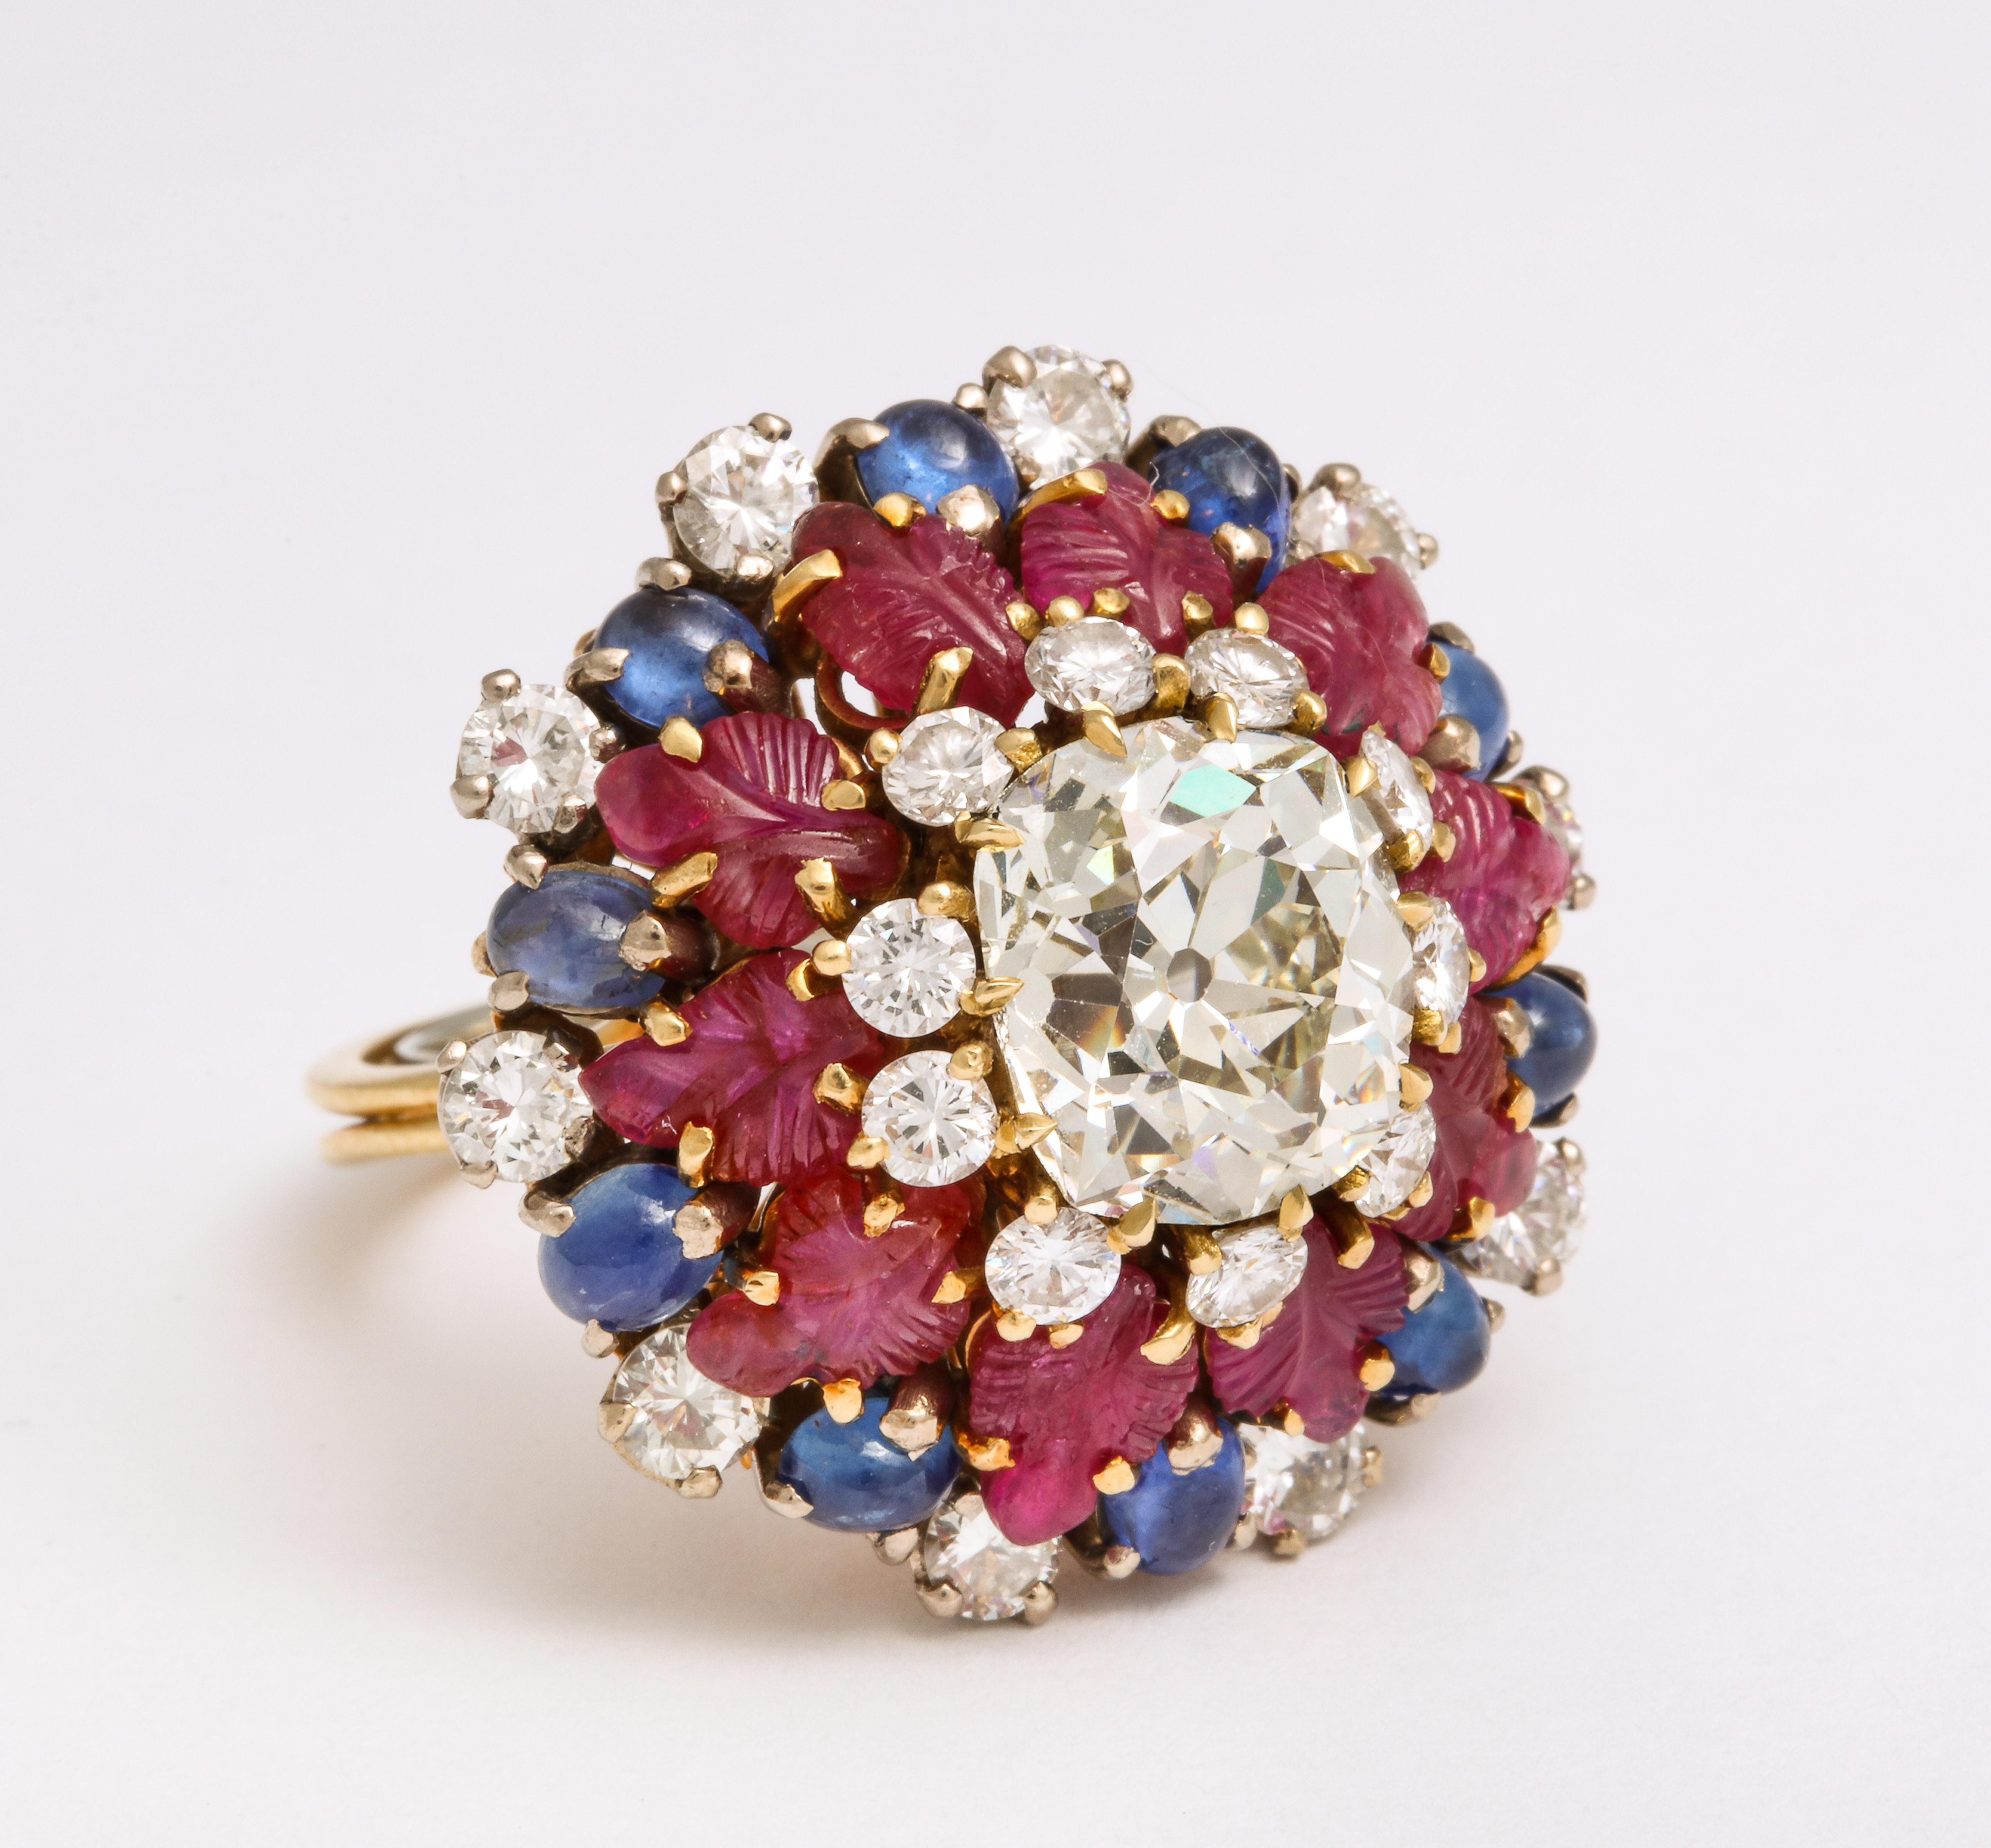 A Tutti Frutti Ruby Sapphire Diamond Gold Cocktail Ring circa 1950, with old mine cushion cut diamonds, ruby leaves and oval cabochon sapphires in yellow gold, measuring an impressive 1 1/5 inches wide and 1 inch high.

Material:
Yellow